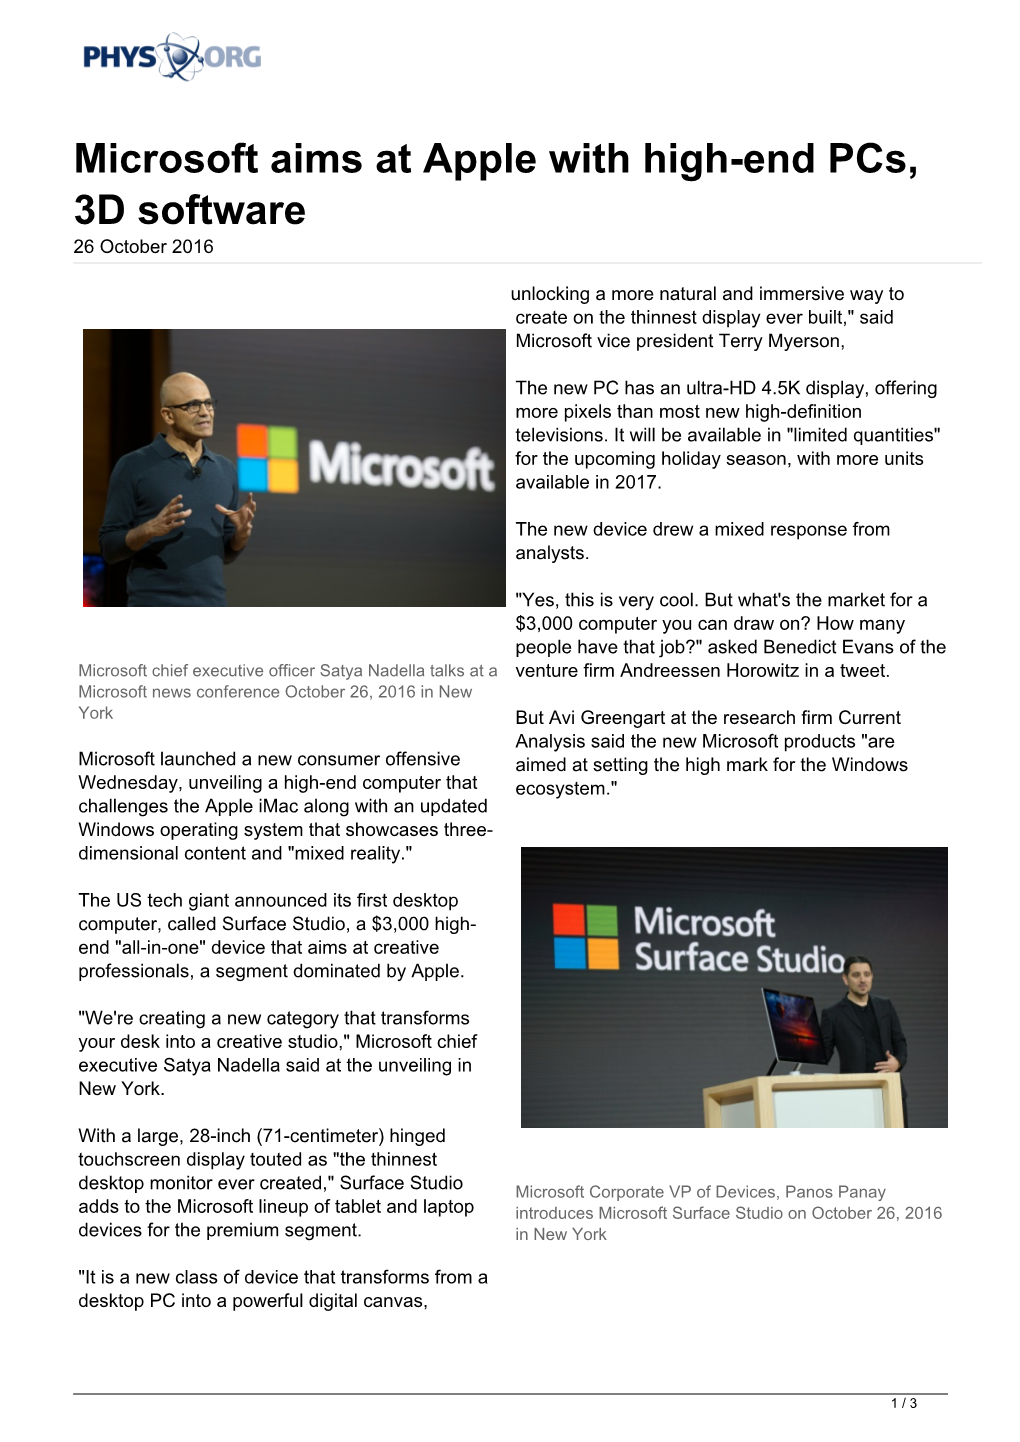 Microsoft Aims at Apple with High-End Pcs, 3D Software 26 October 2016